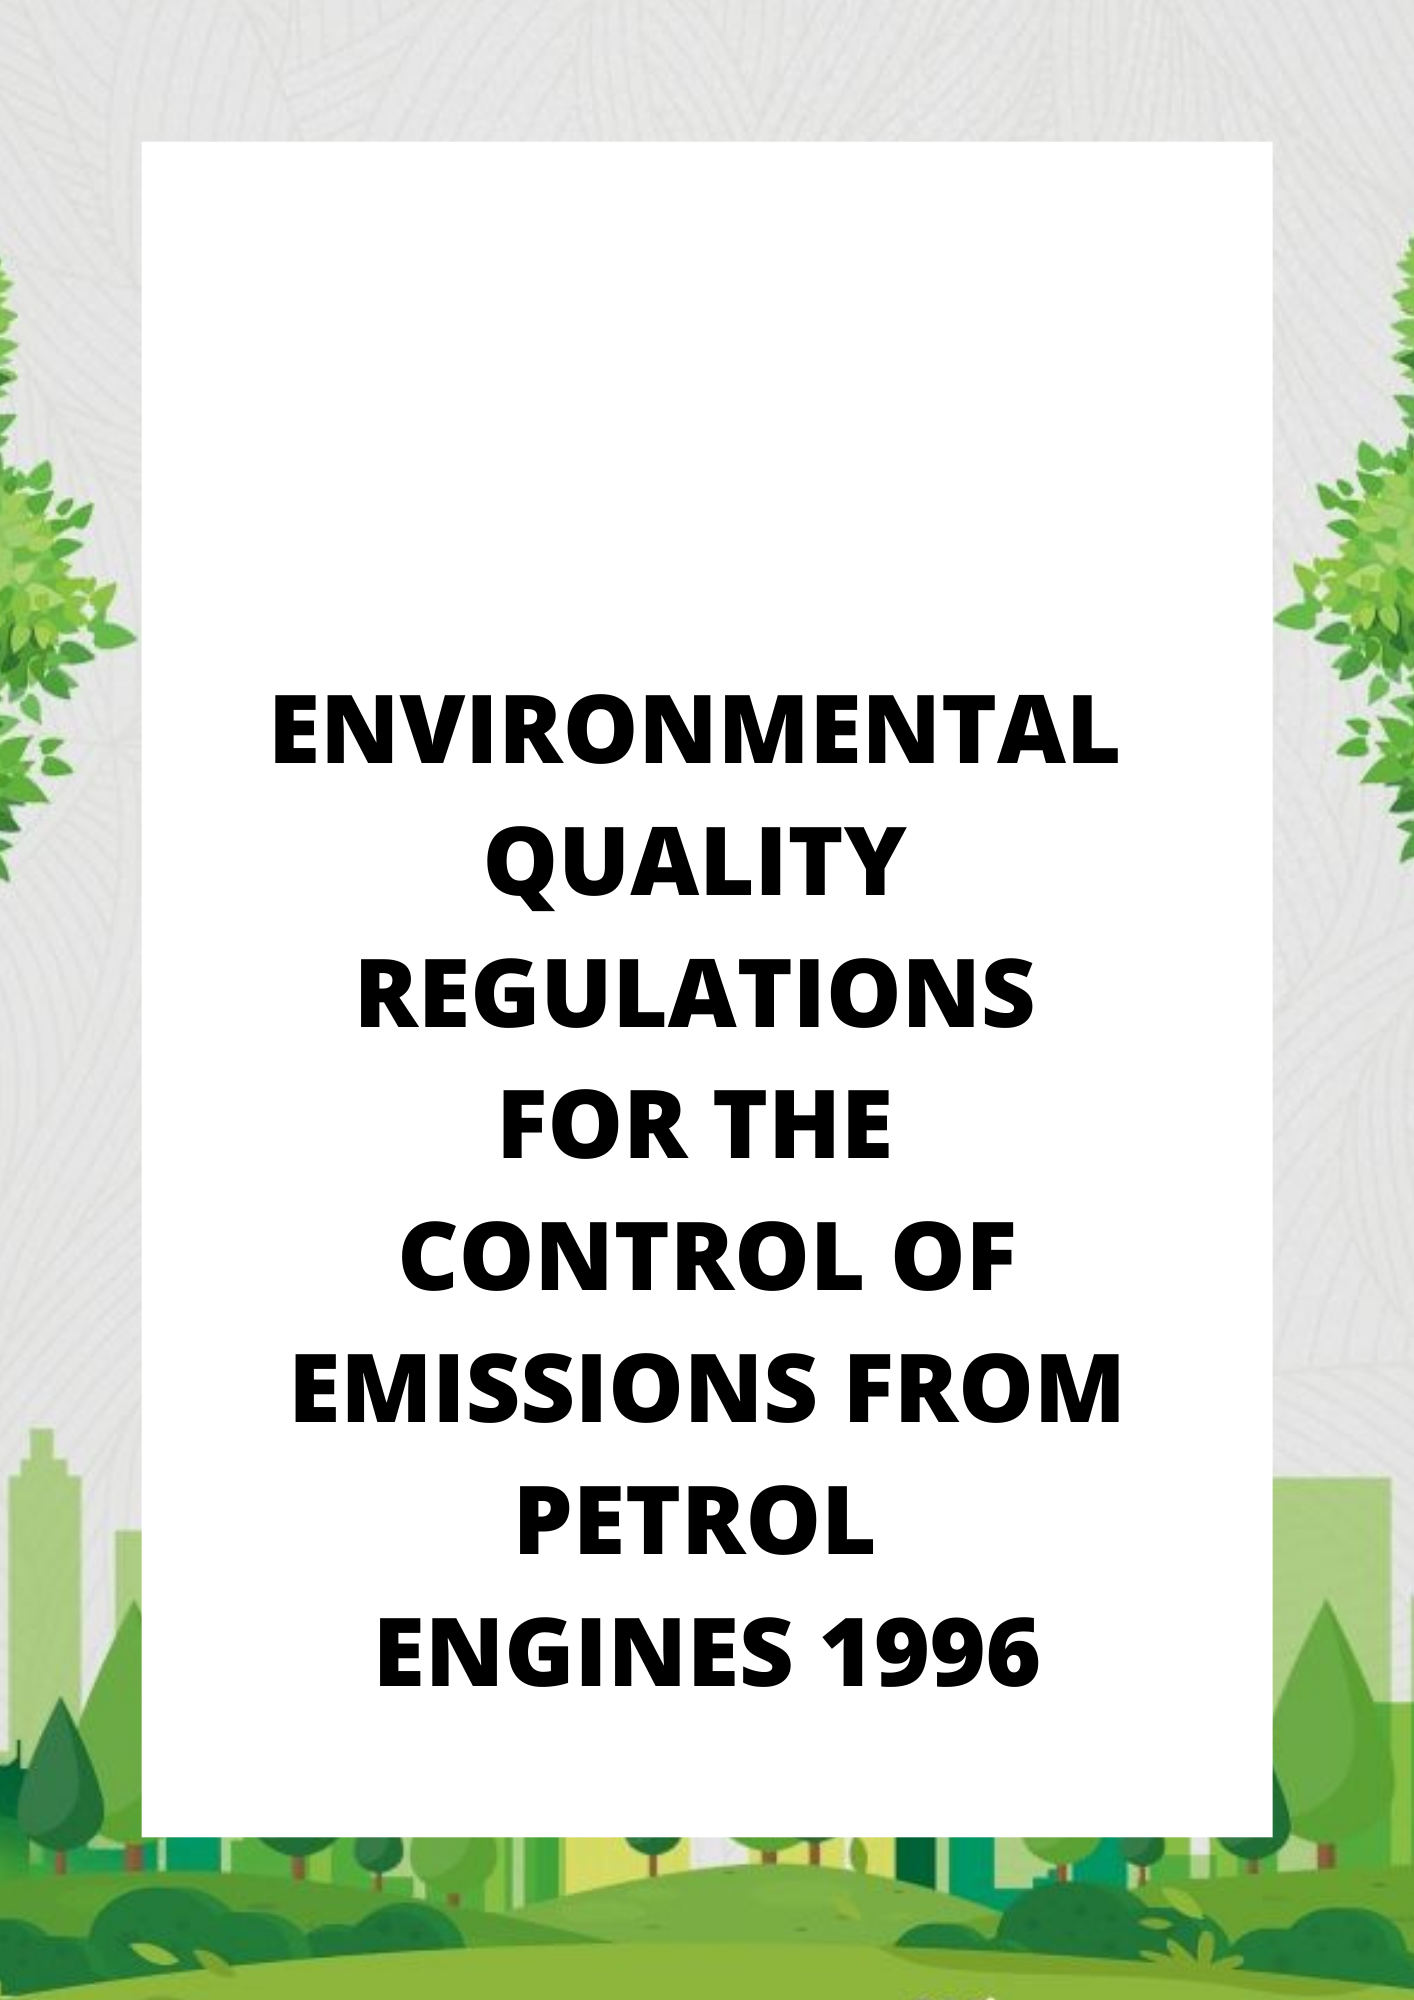 Environmental Quality Regulations for the Control of Emissions from Petrol Engines 1996